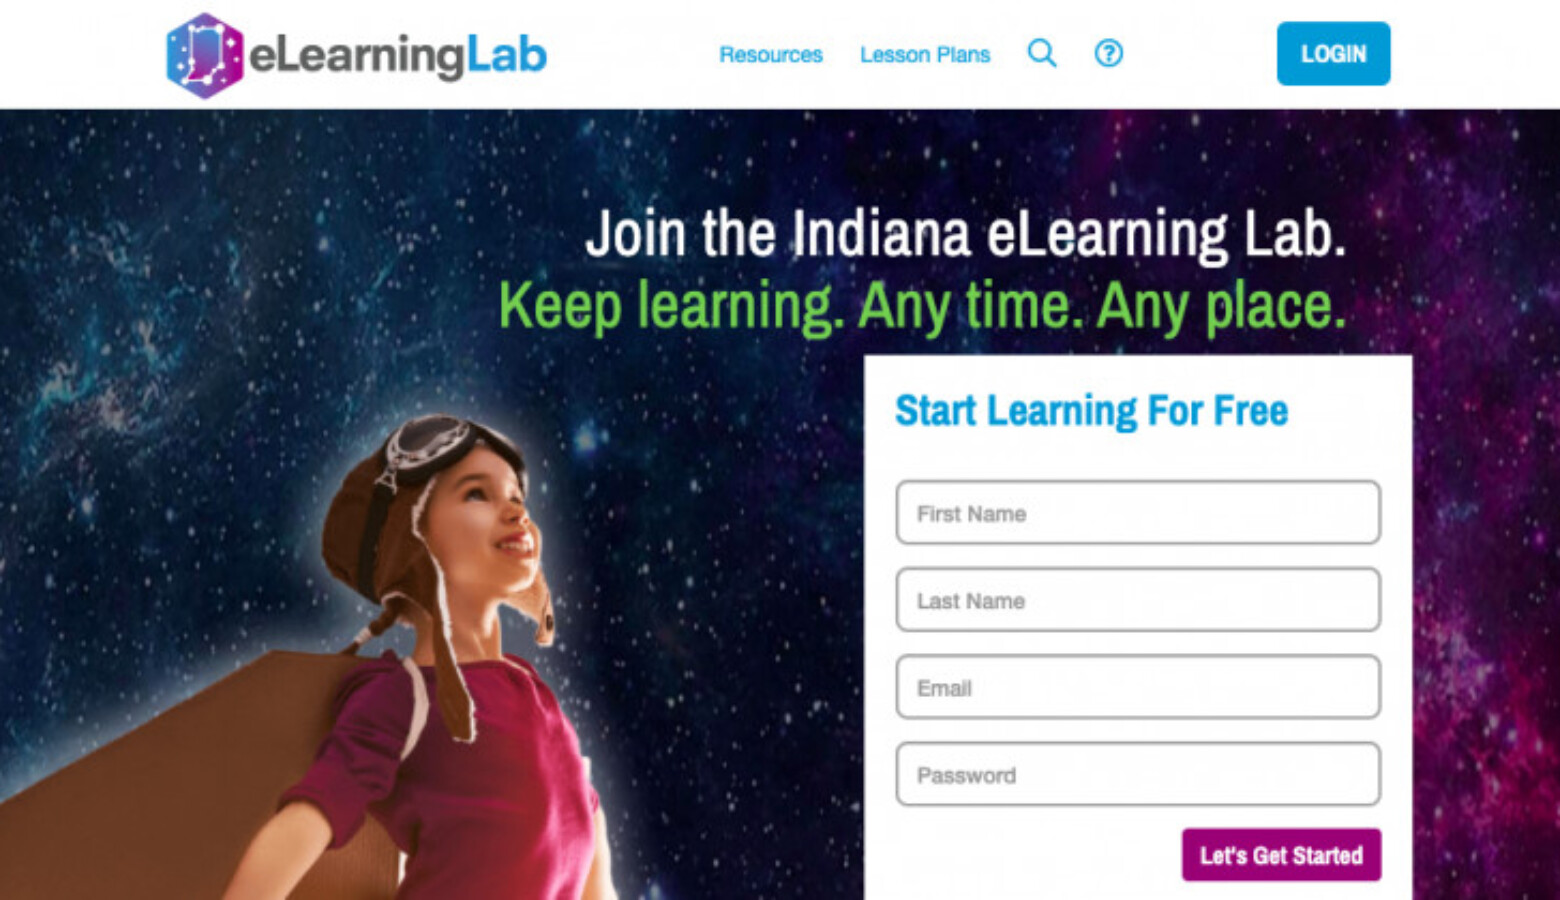 The website of the Indiana eLearning Lab on Wednesday, July 22, 2020.